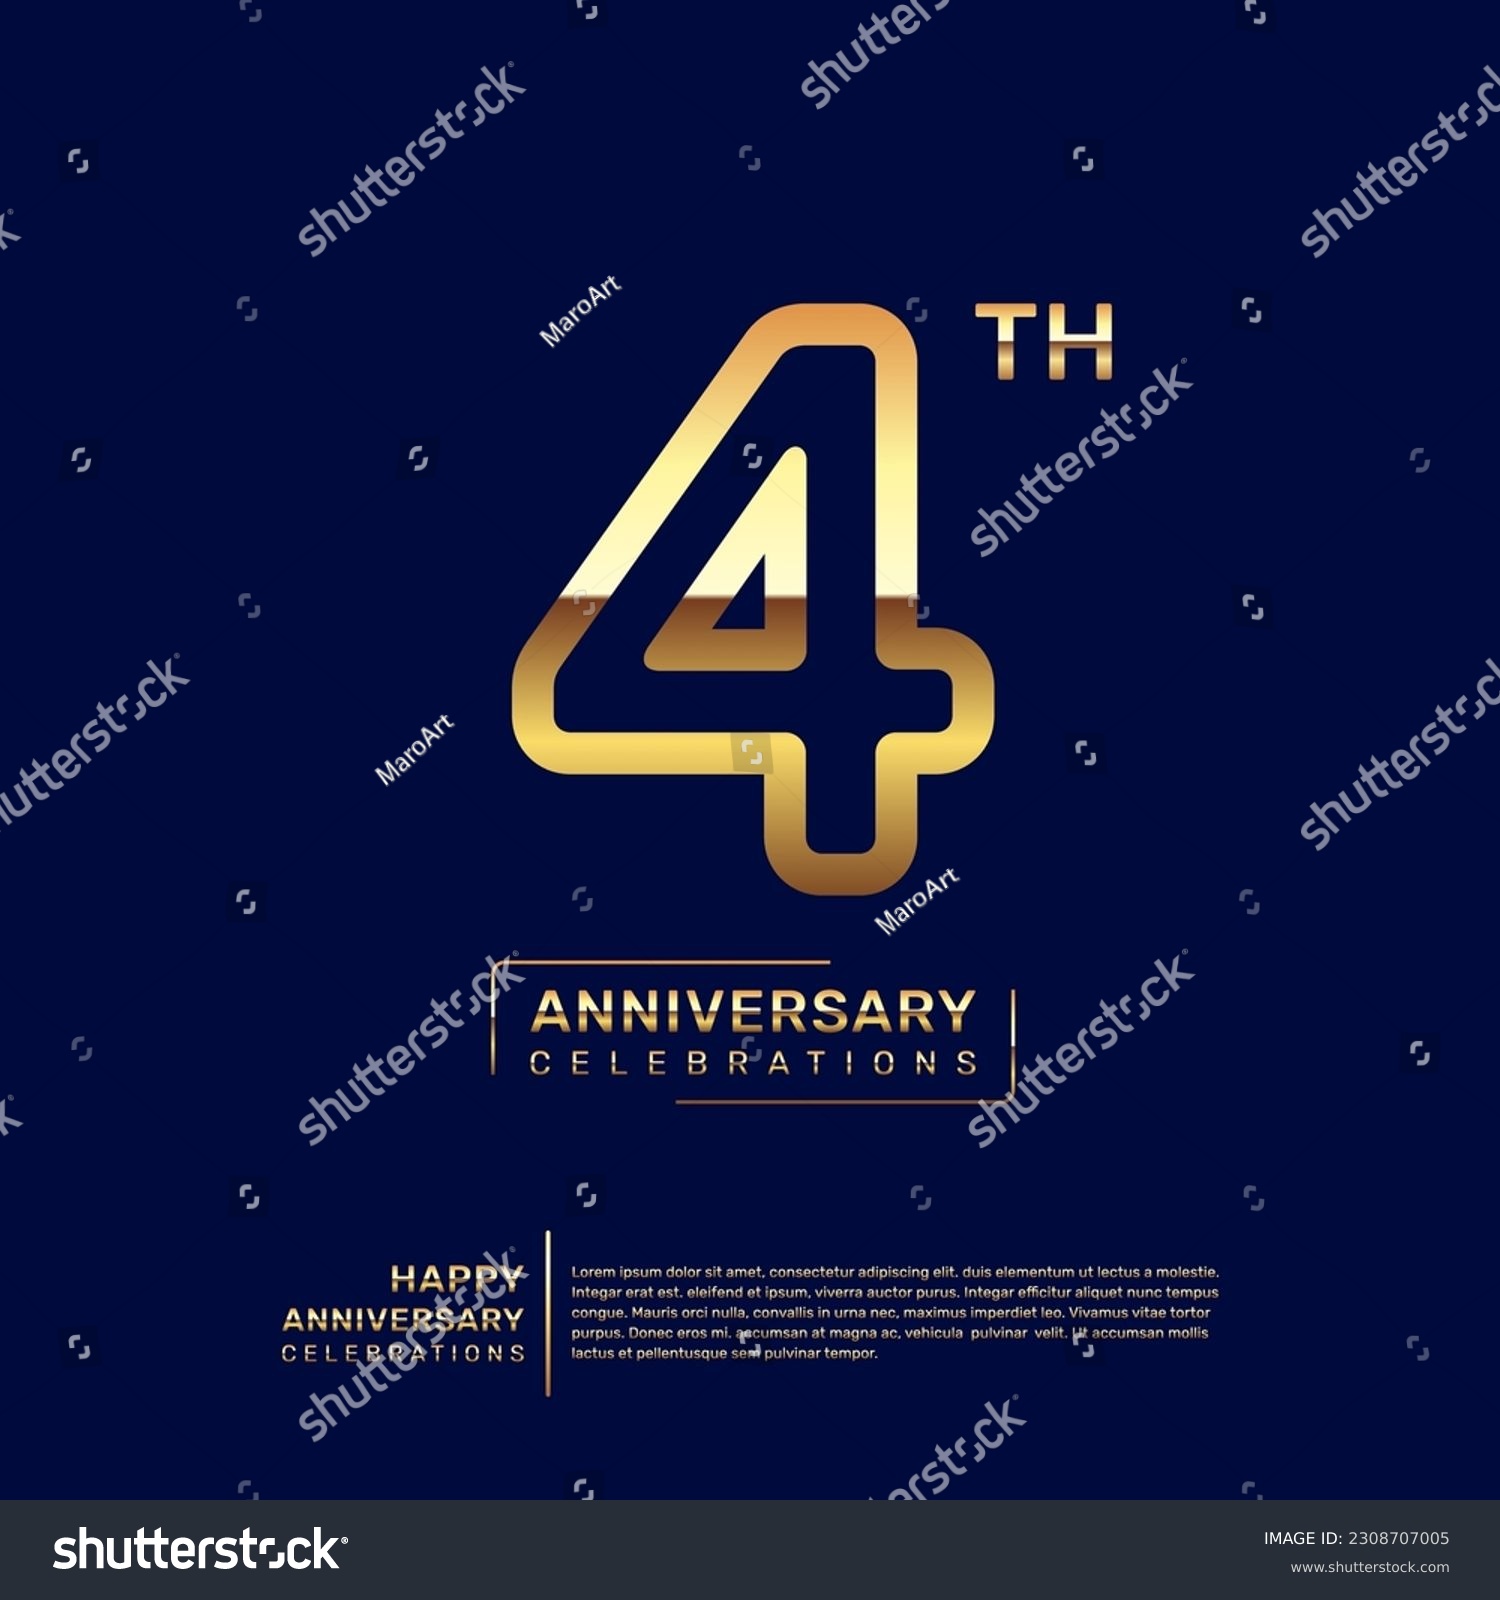 SVG of 4 year anniversary logo design, anniversary celebration logo with double line concept, logo vector template illustration svg